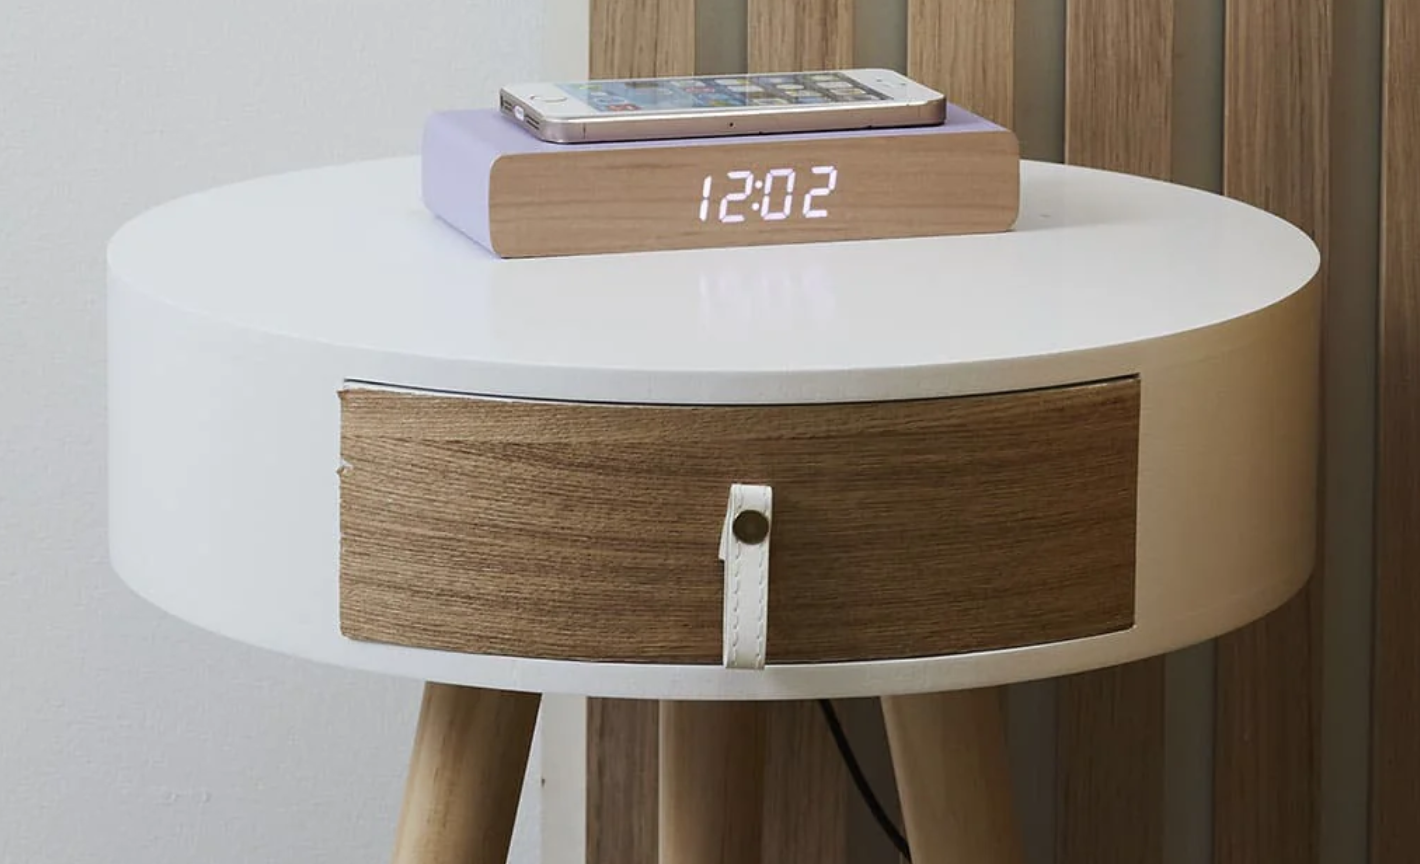 Alarm Clock & Wireless Phone Charger